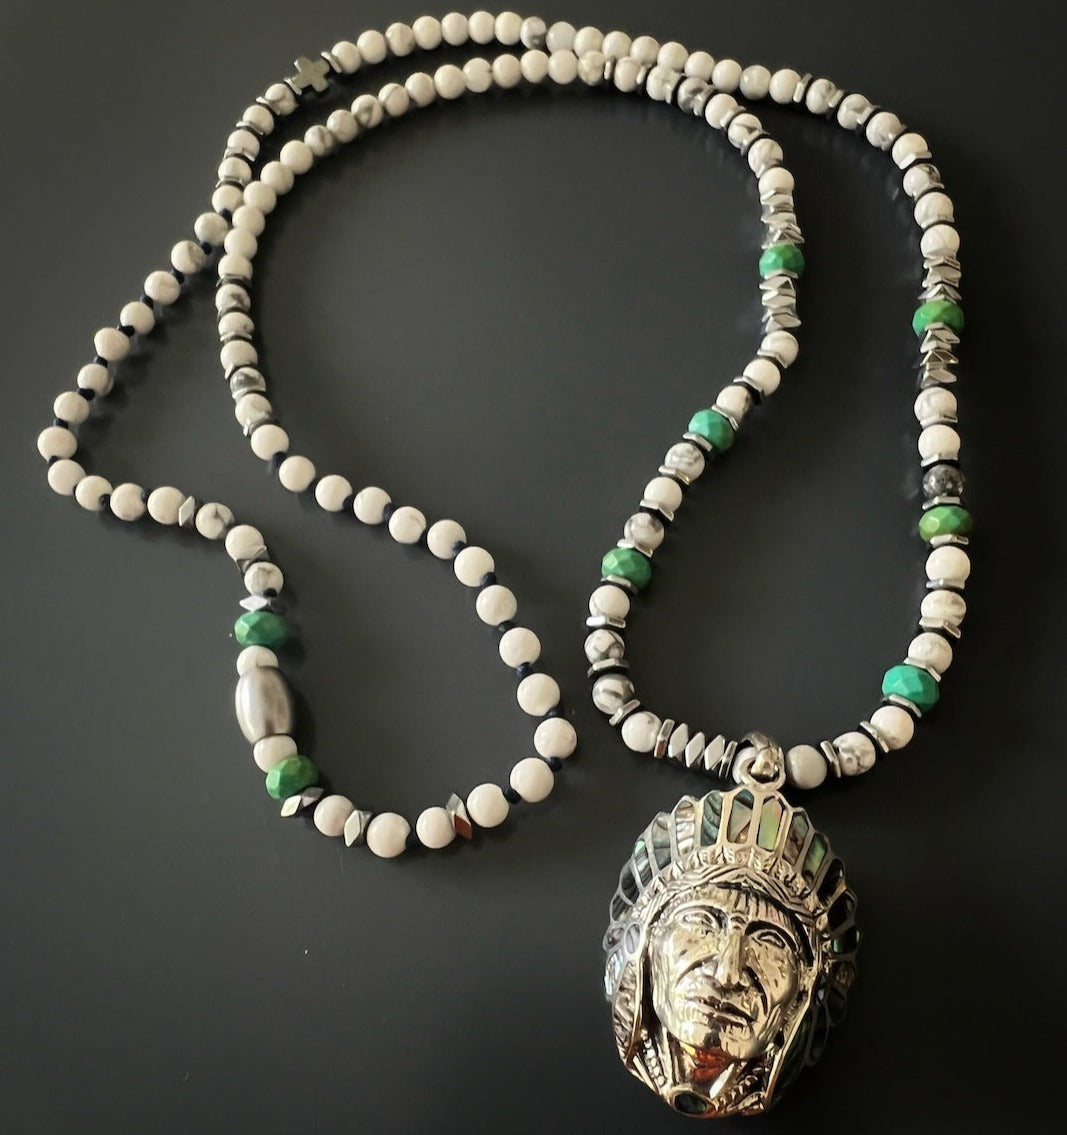 Detailed shot of the white howlite stone beads used in the Native American Chief Necklace.